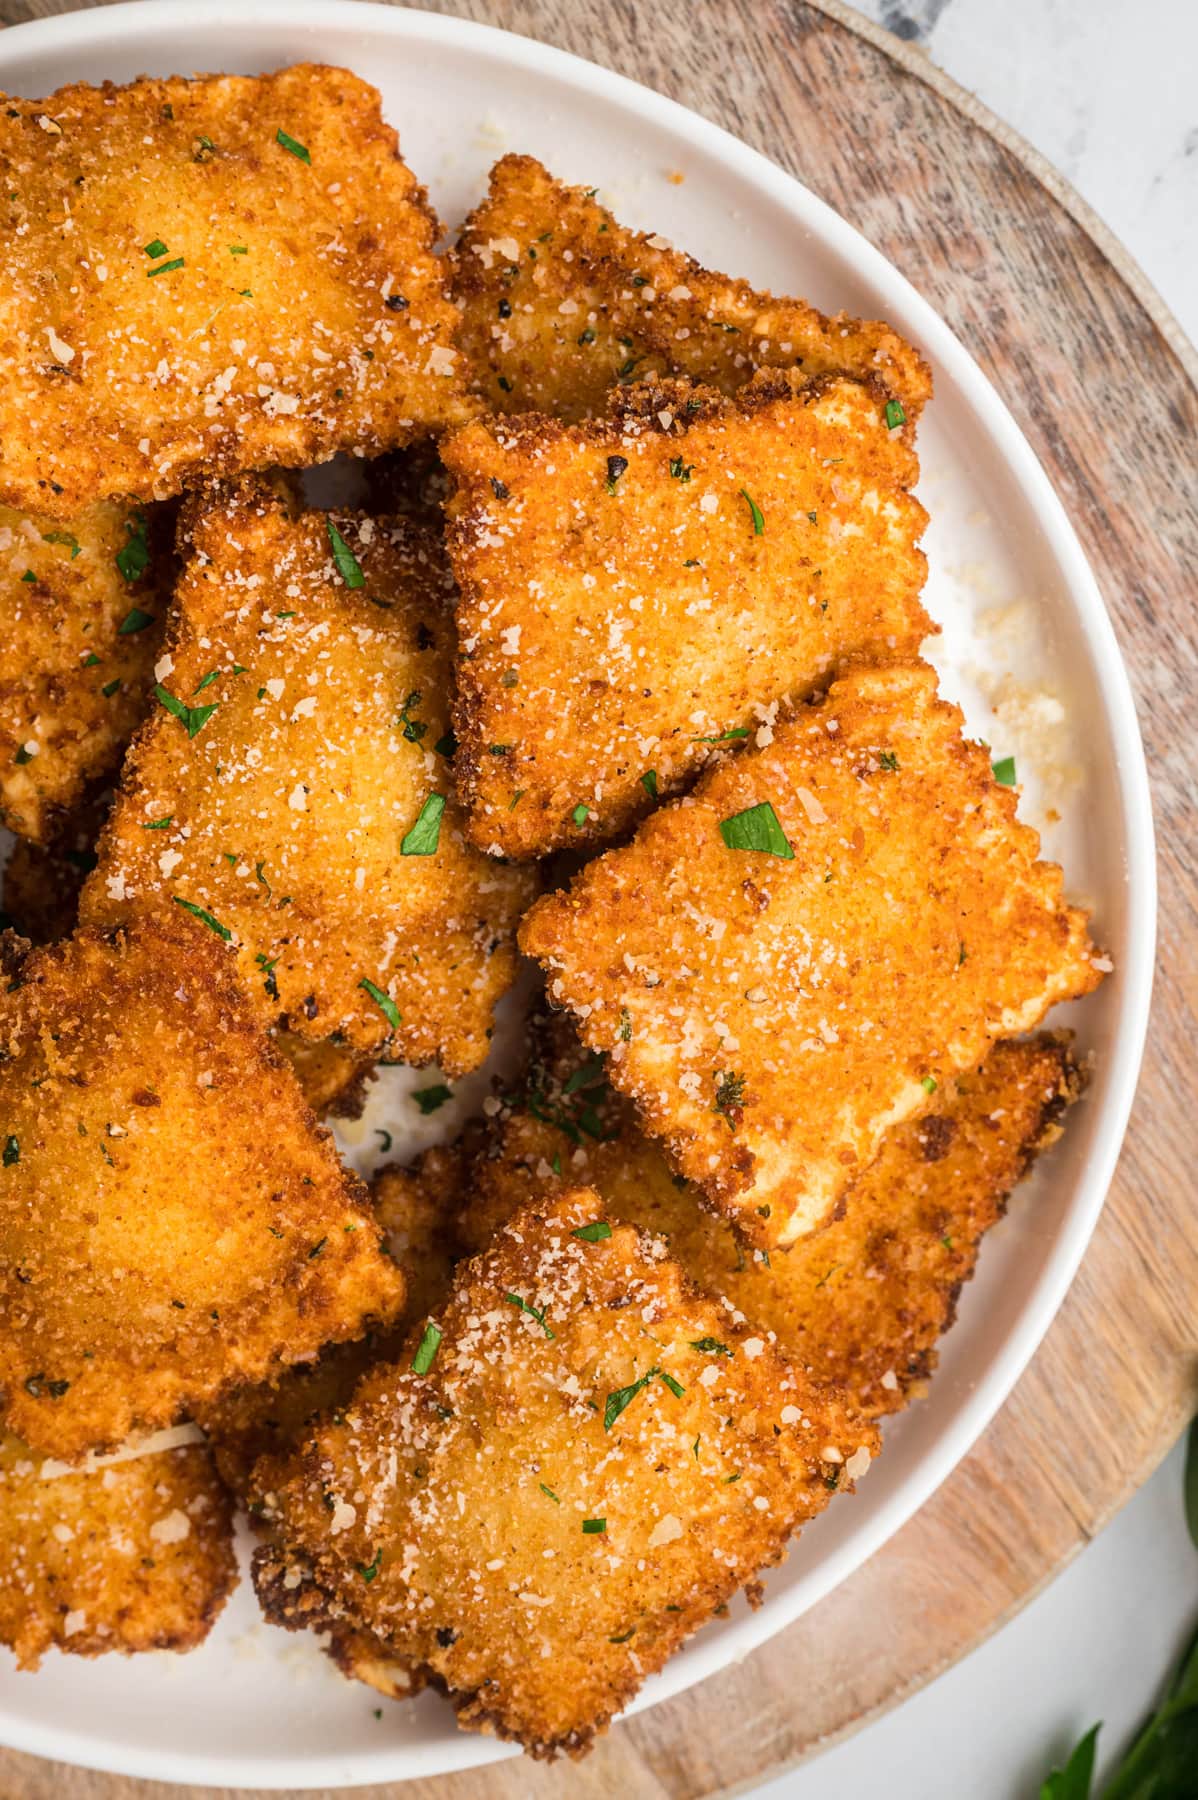 Overhead view of a plate of toasted ravioli